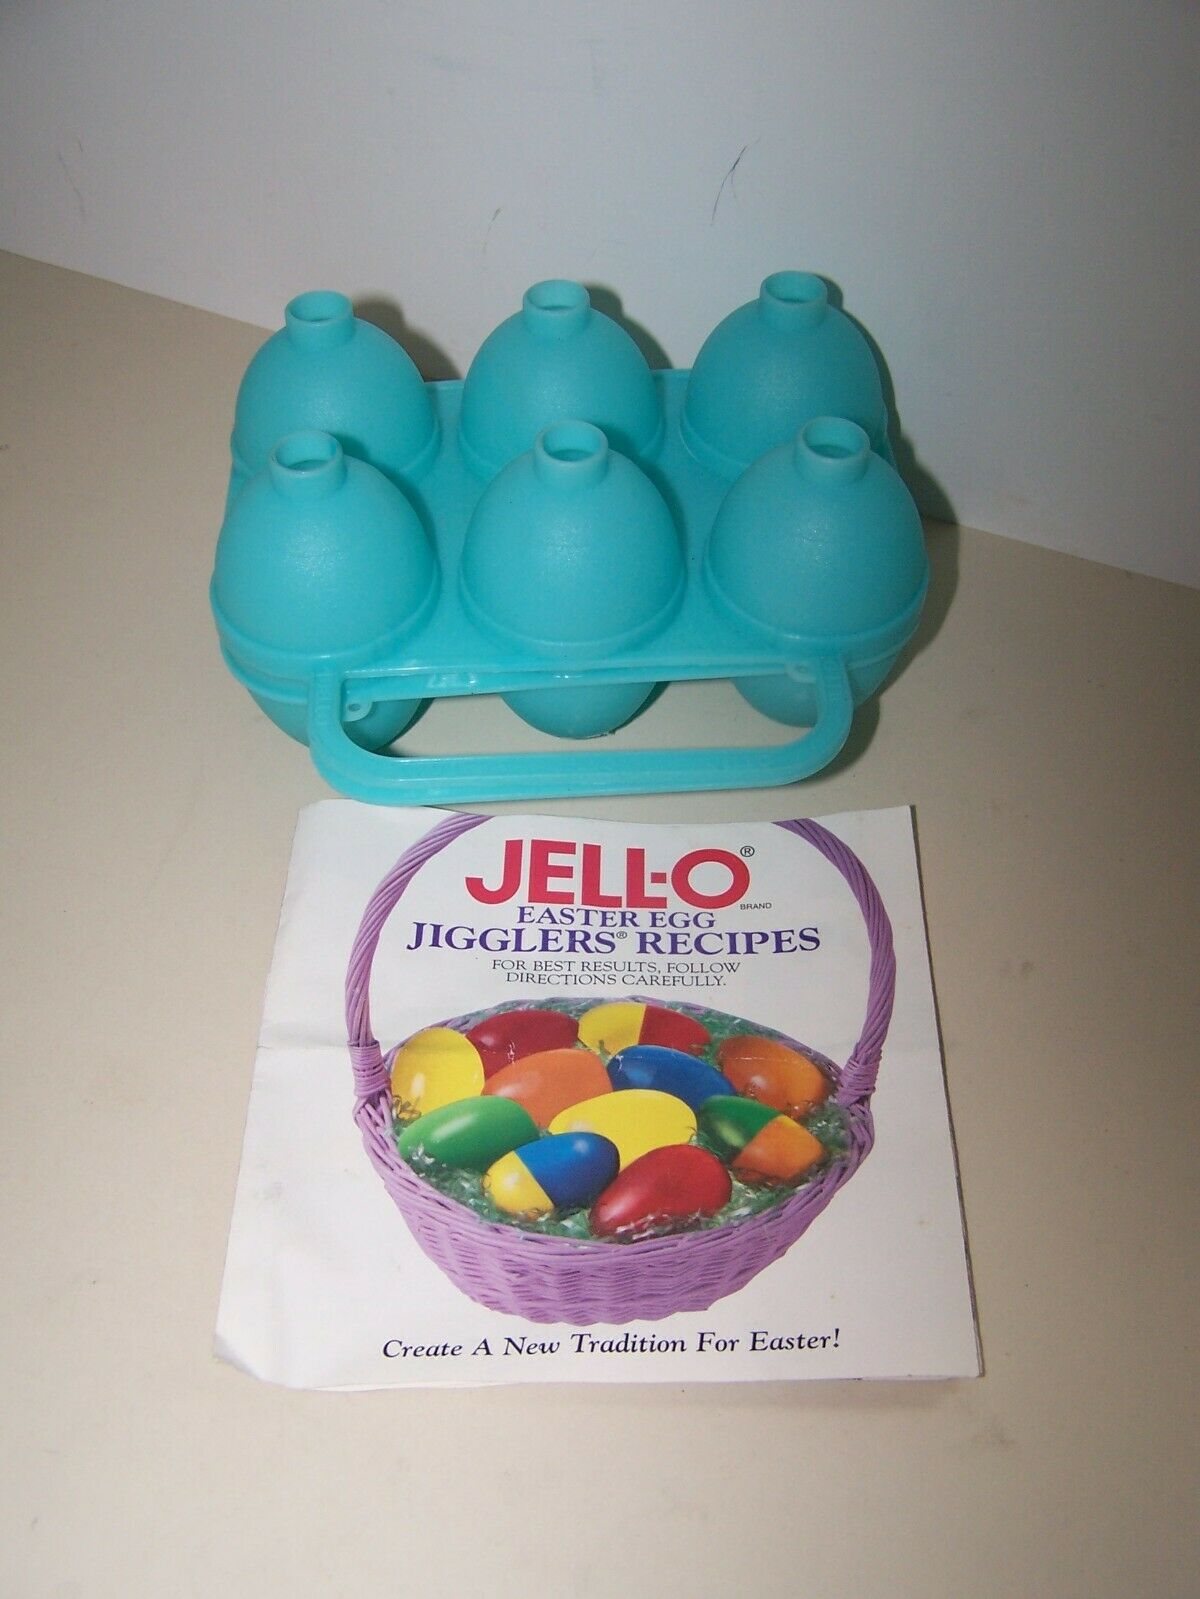 Jell-o Easter Egg Jigglers Turquoise Mold And Recipe Booklet 1 Broken Hinge